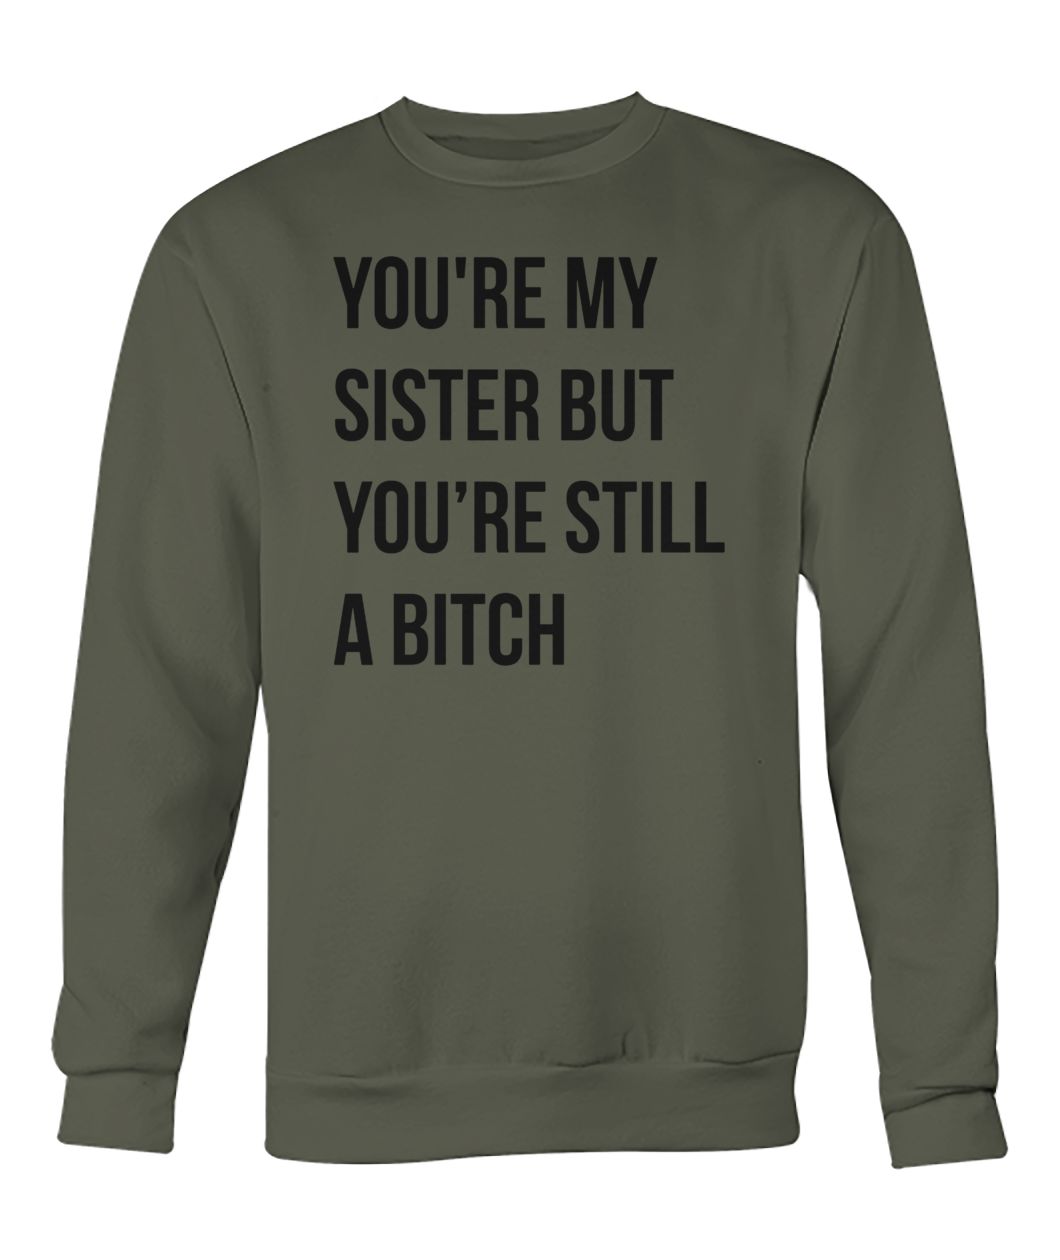 Official you're my sister but you're still a bitch crew neck sweatshirt